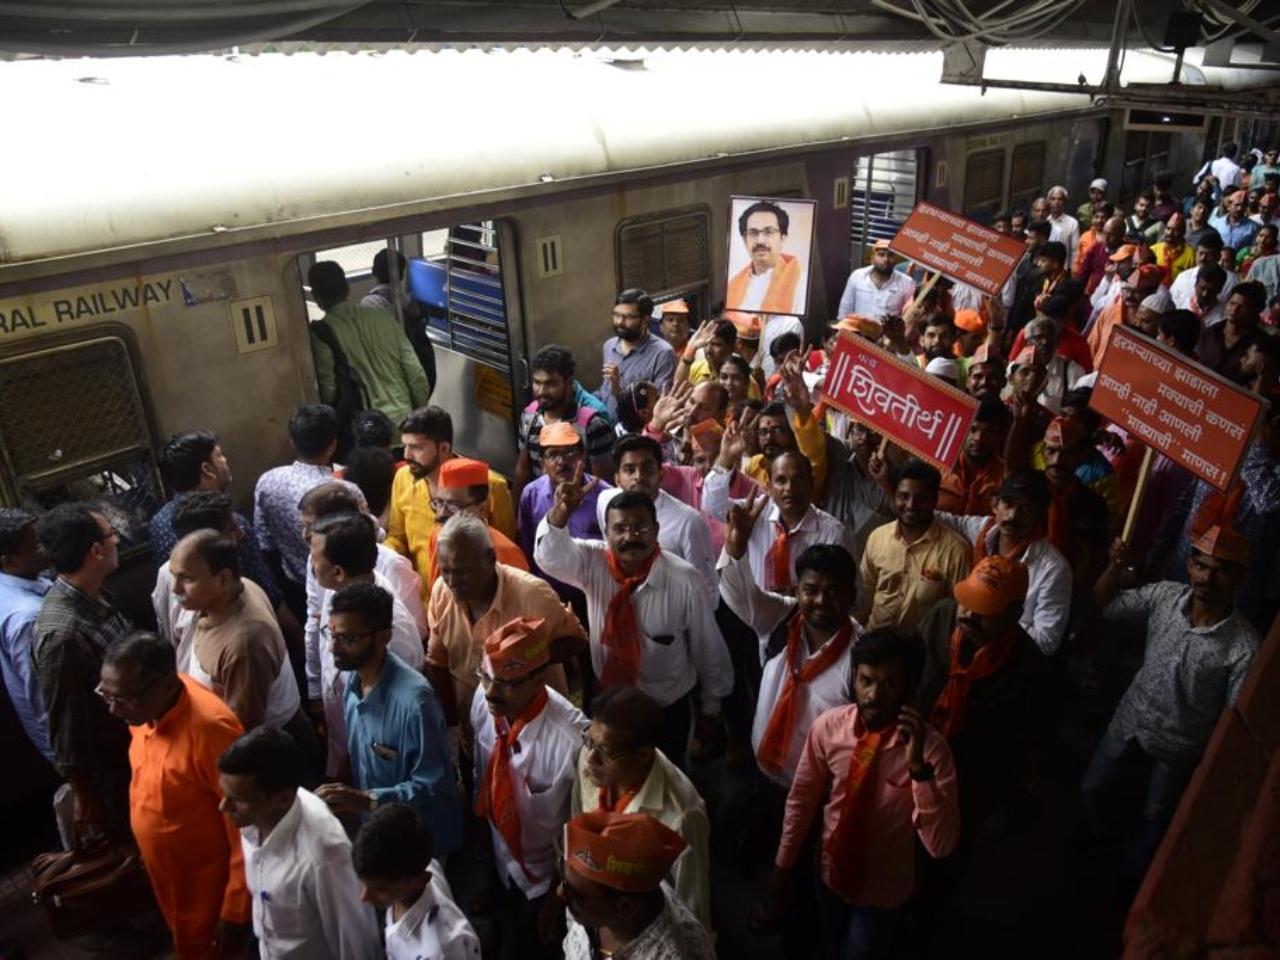 Uddhav Thackeray supporters can be seen holding placards at a Mumabi railway station. Pic/Atul Kamble